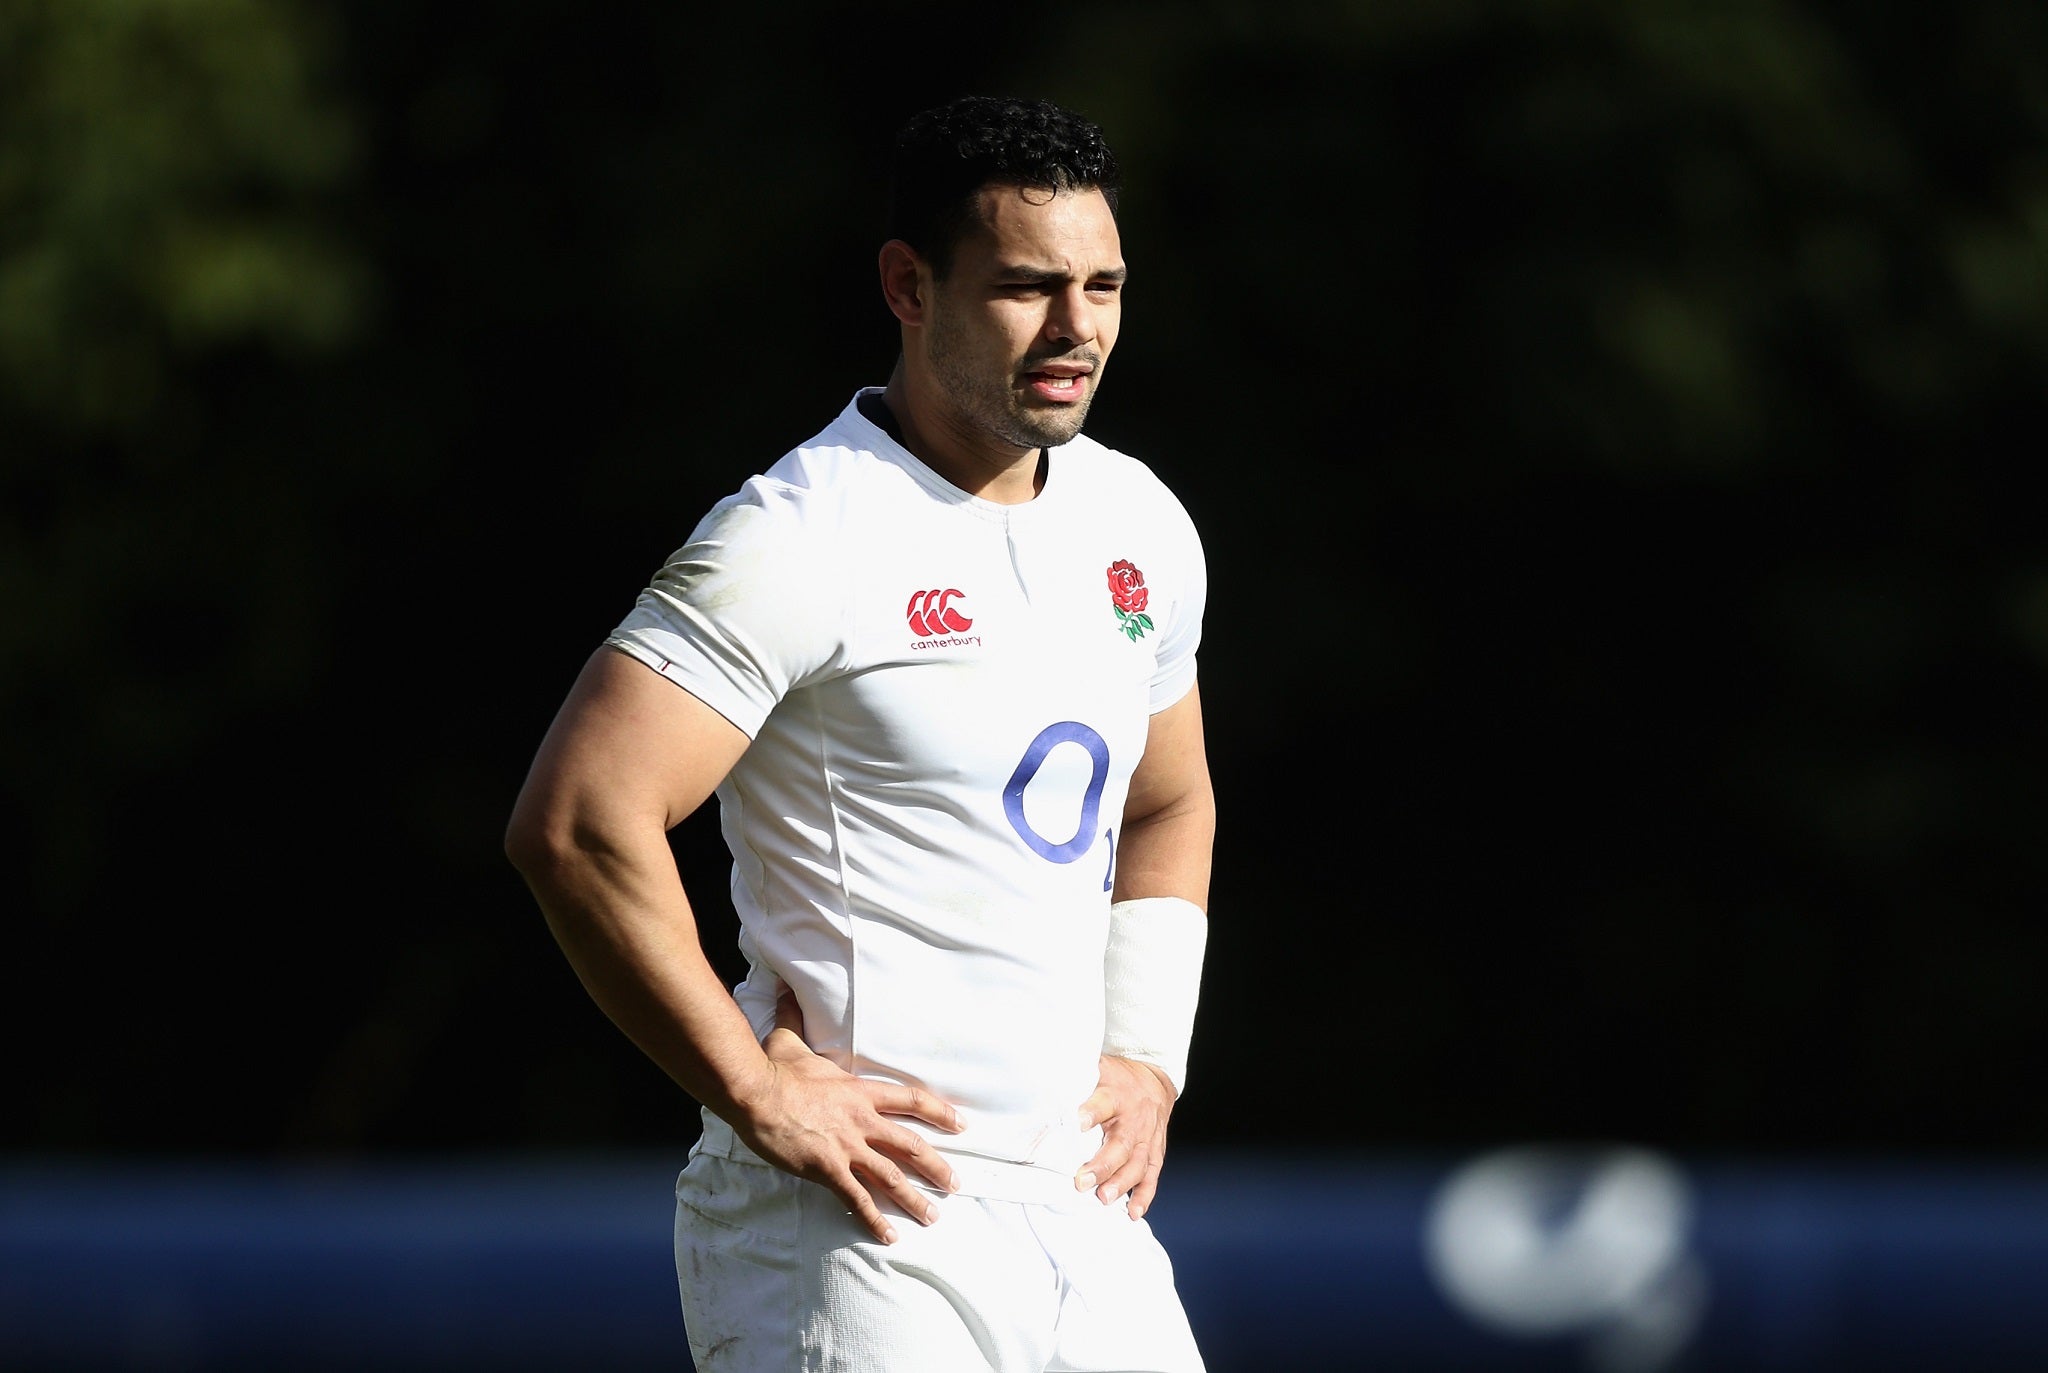 Ben Te'o will make his first start for England against Italy